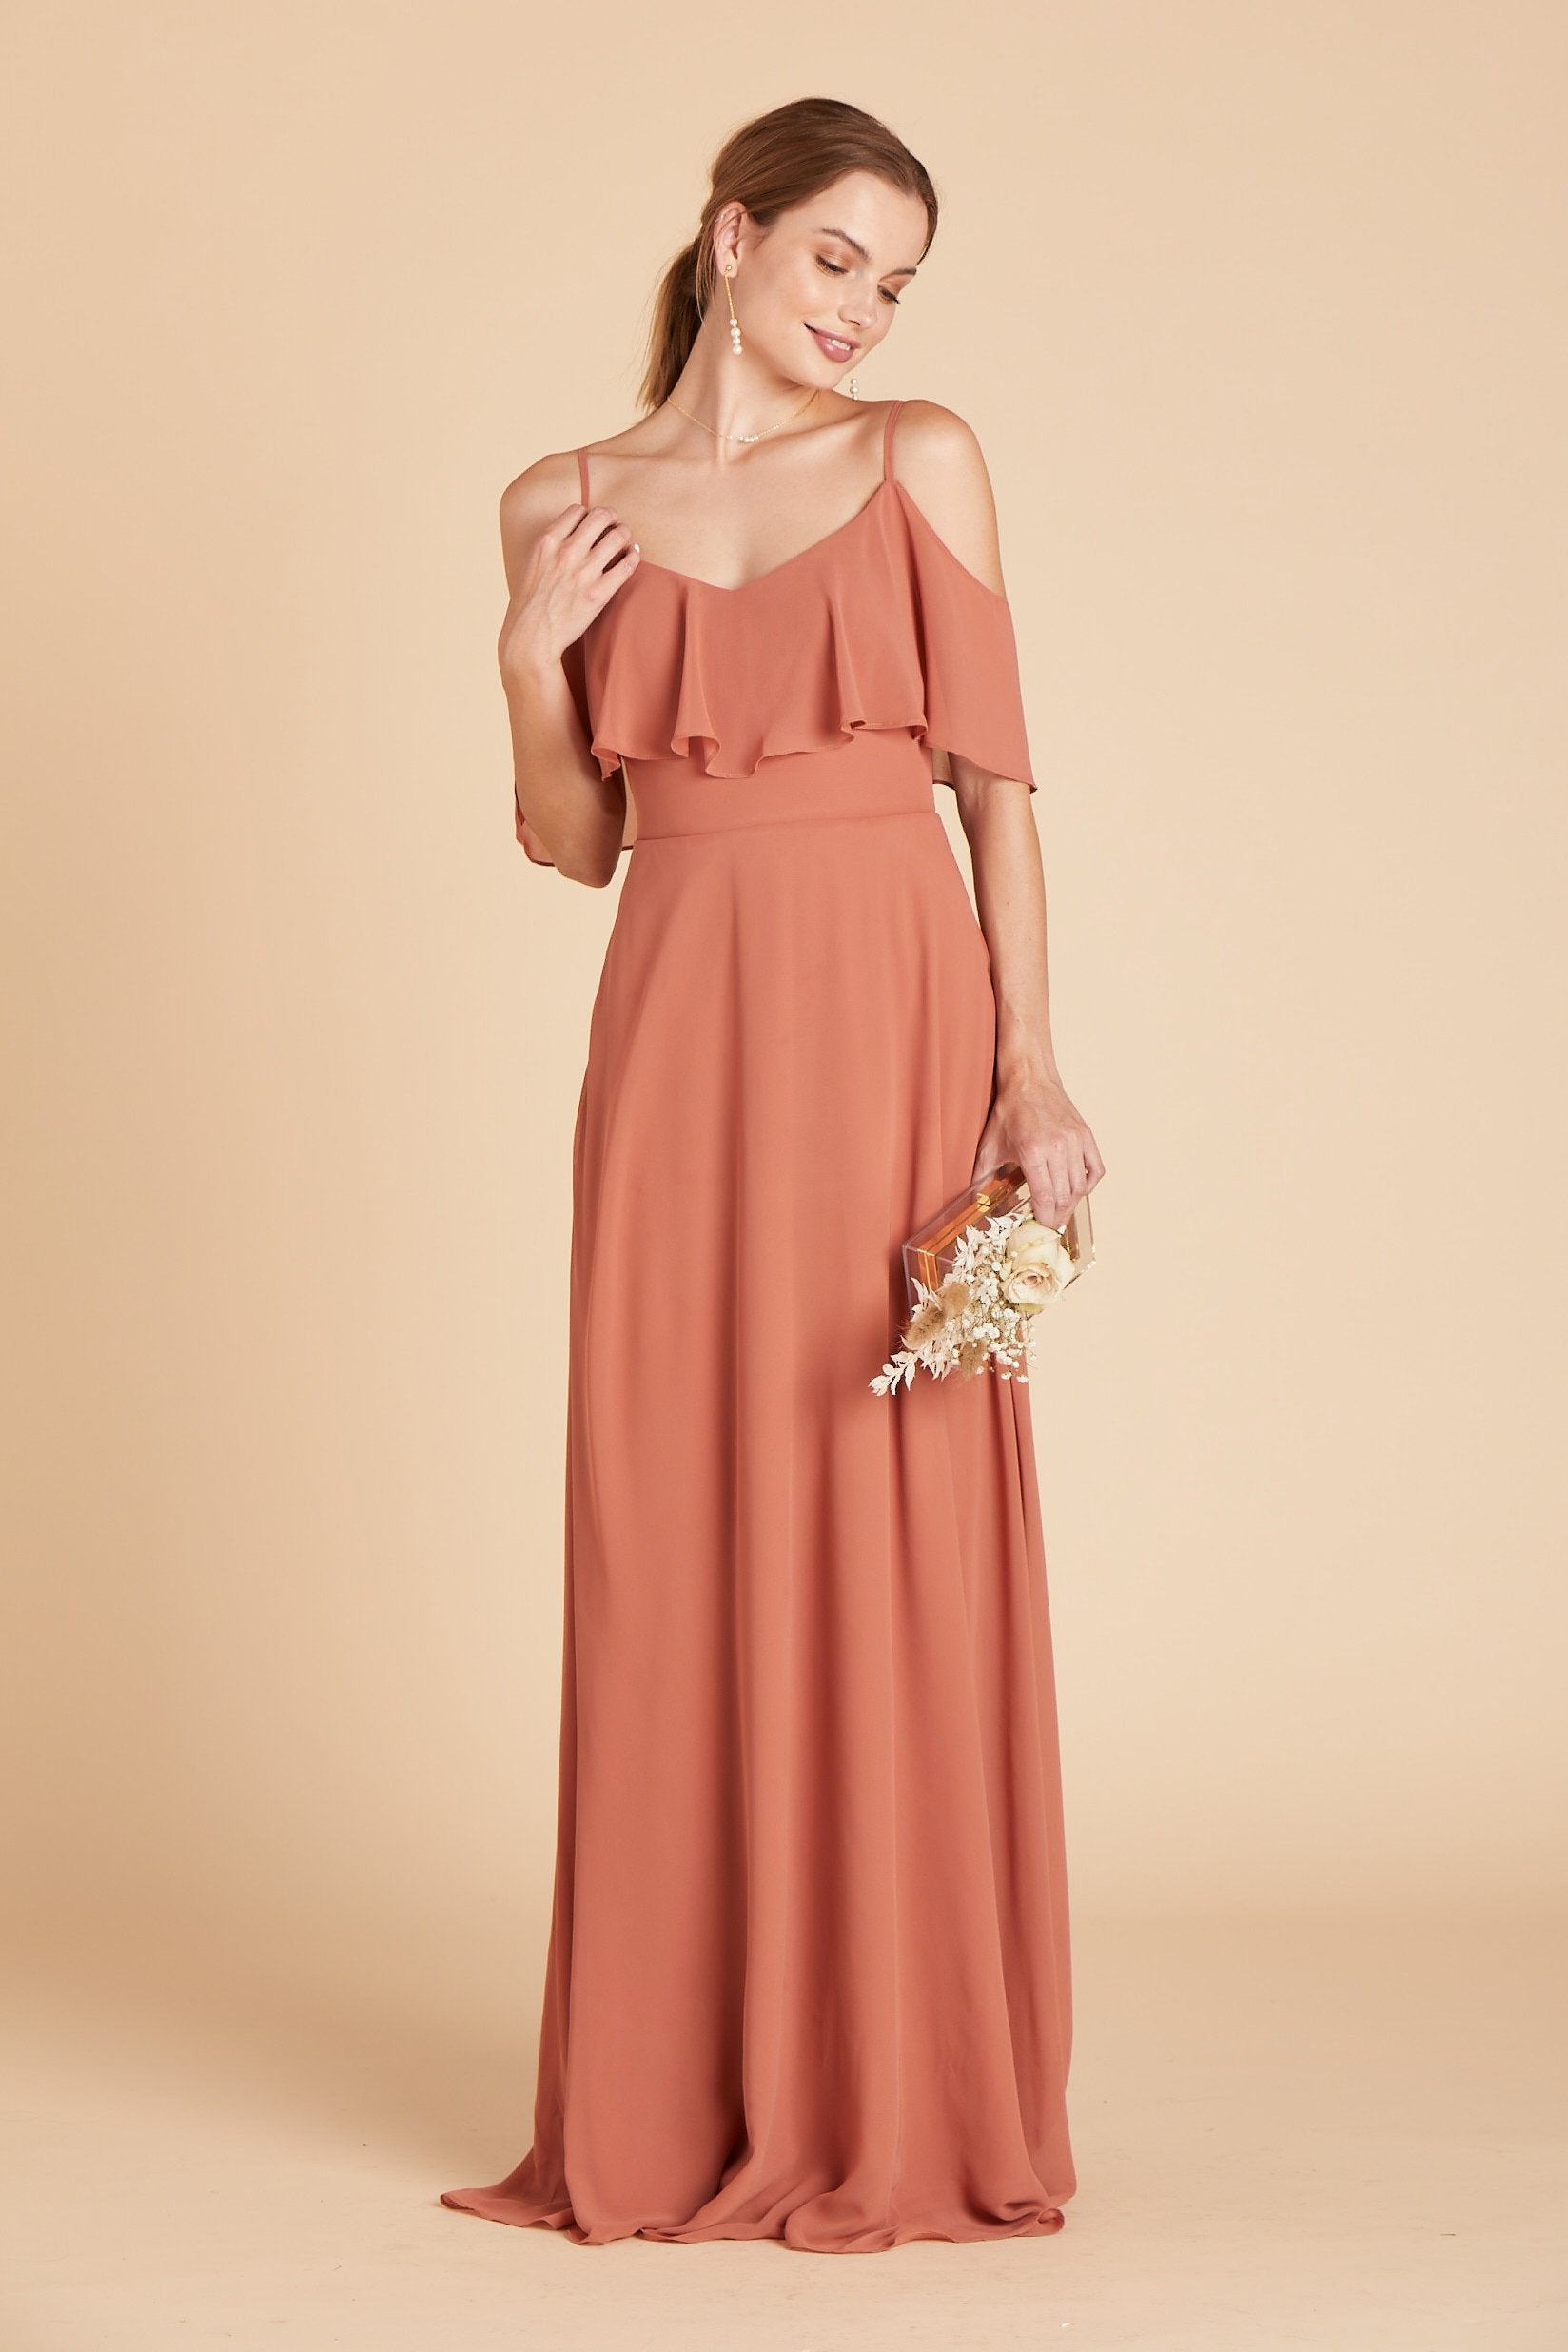 Front view of the Jane Convertible Dress in terracotta chiffon worn by a slender model with a light skin tone.